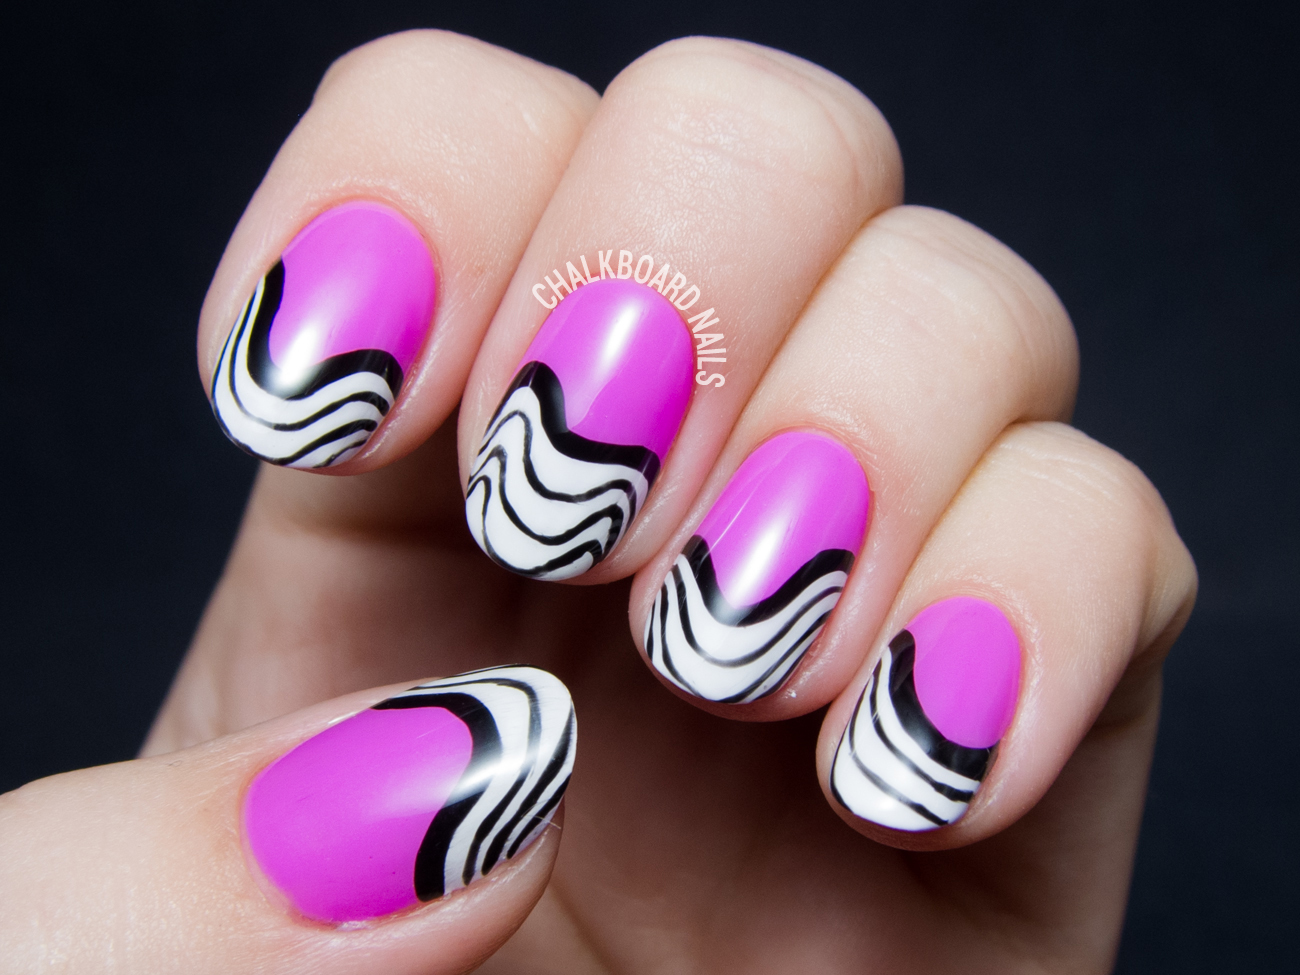 Ride the Waves with a Pop of Pink | Chalkboard Nails | Phoenix, Arizona